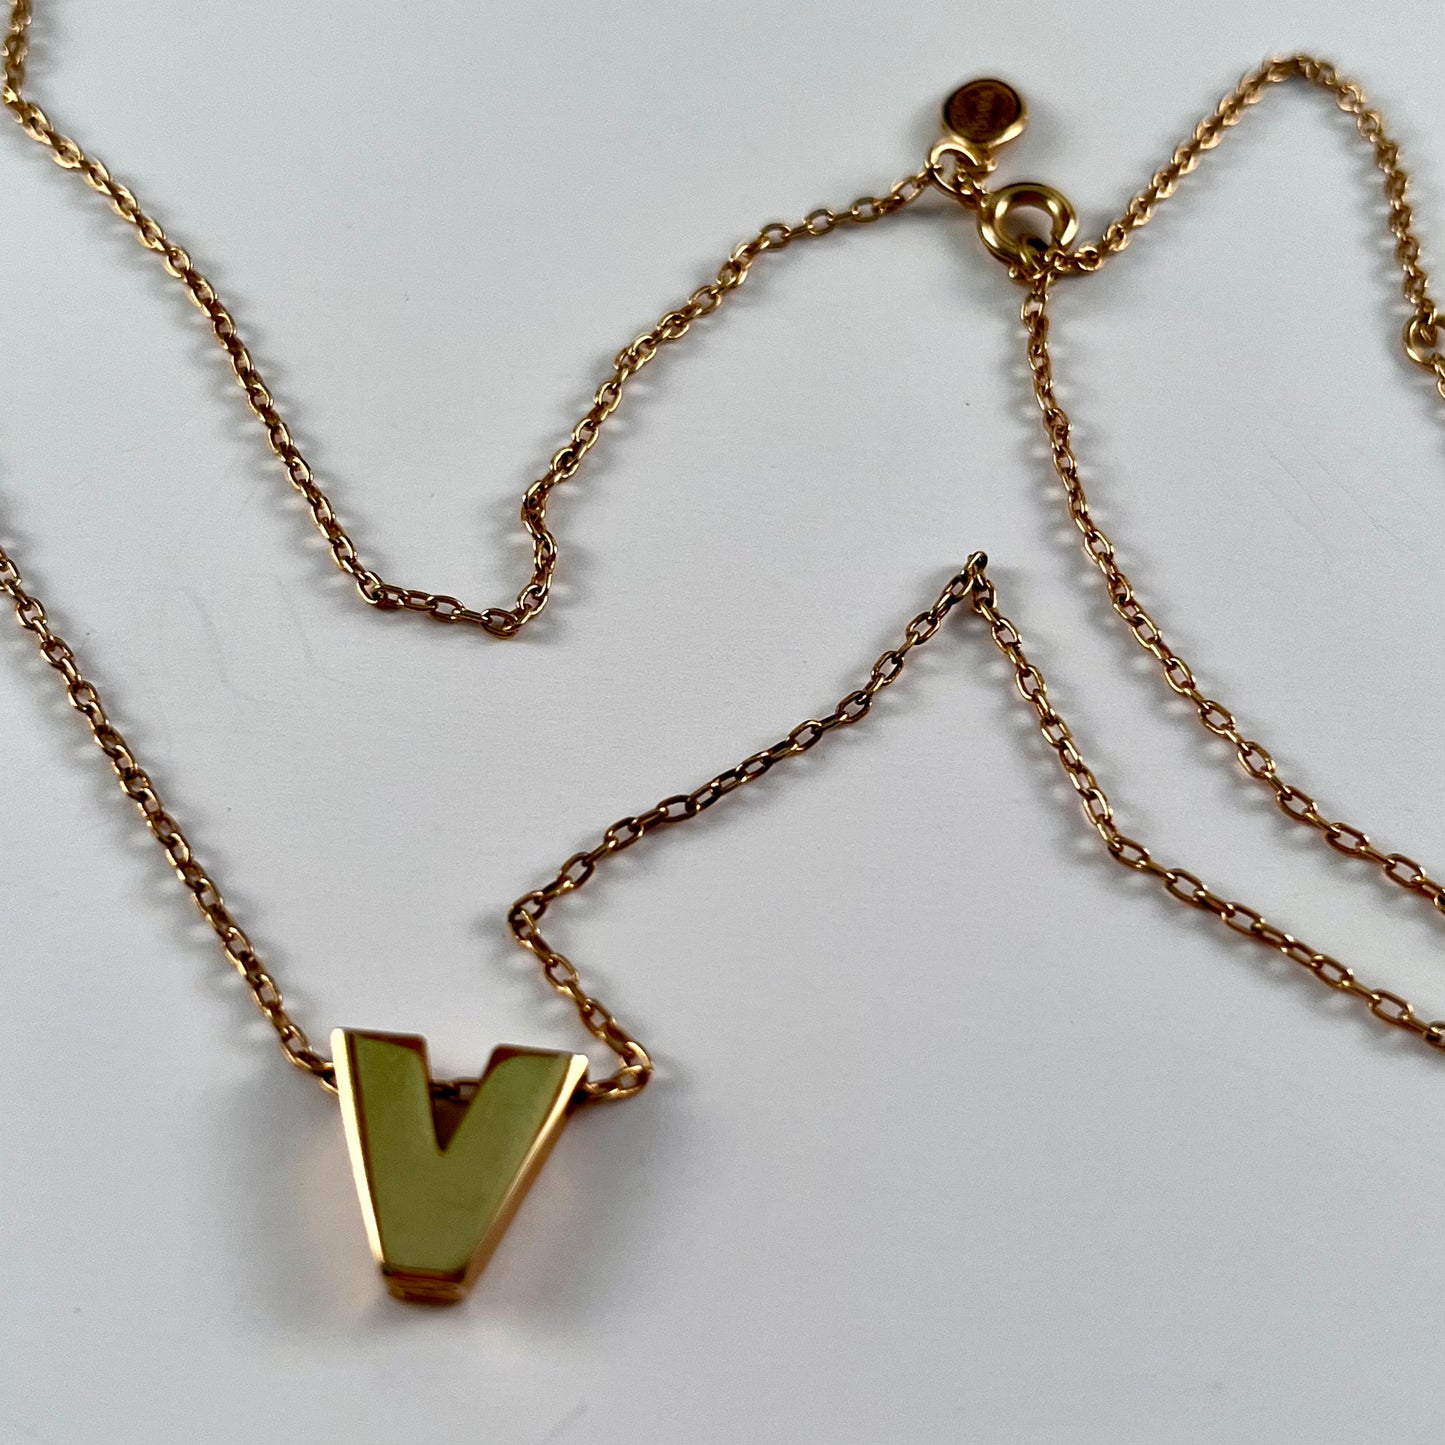 1978 Avon Initial Attraction Necklace